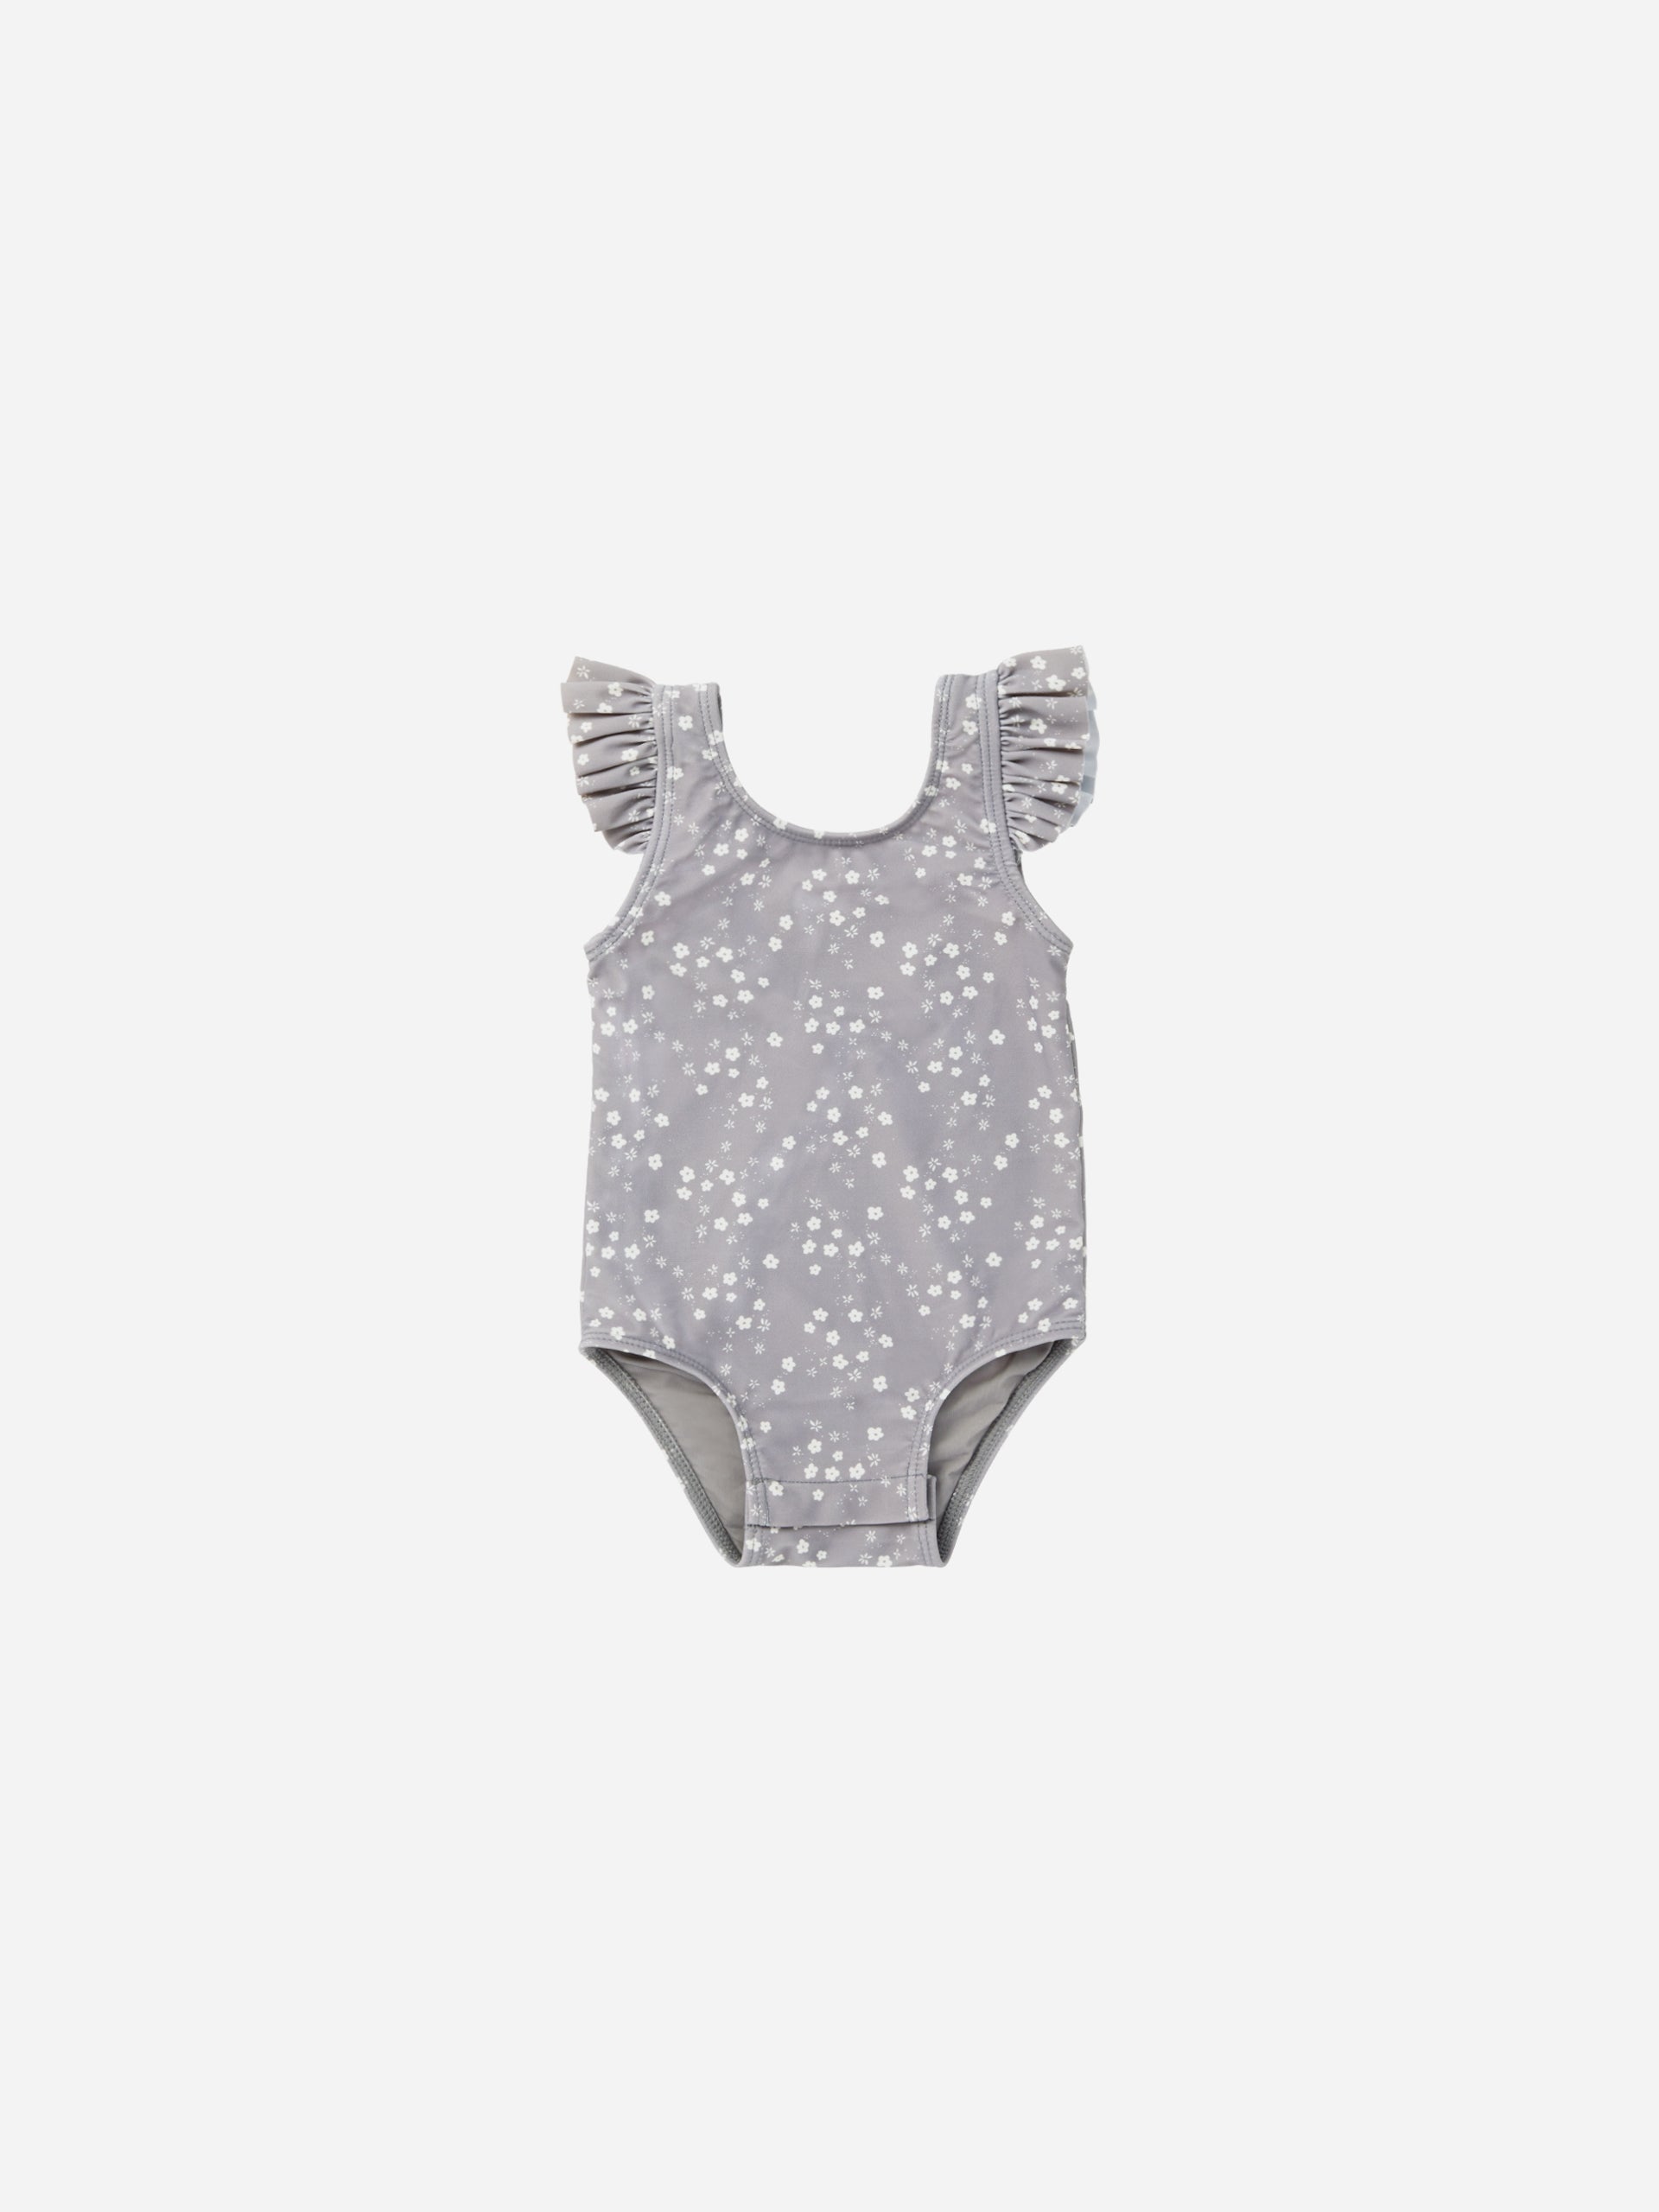 Flutter One-Piece Swimsuit || Fleur - Rylee + Cru | Kids Clothes | Trendy Baby Clothes | Modern Infant Outfits |